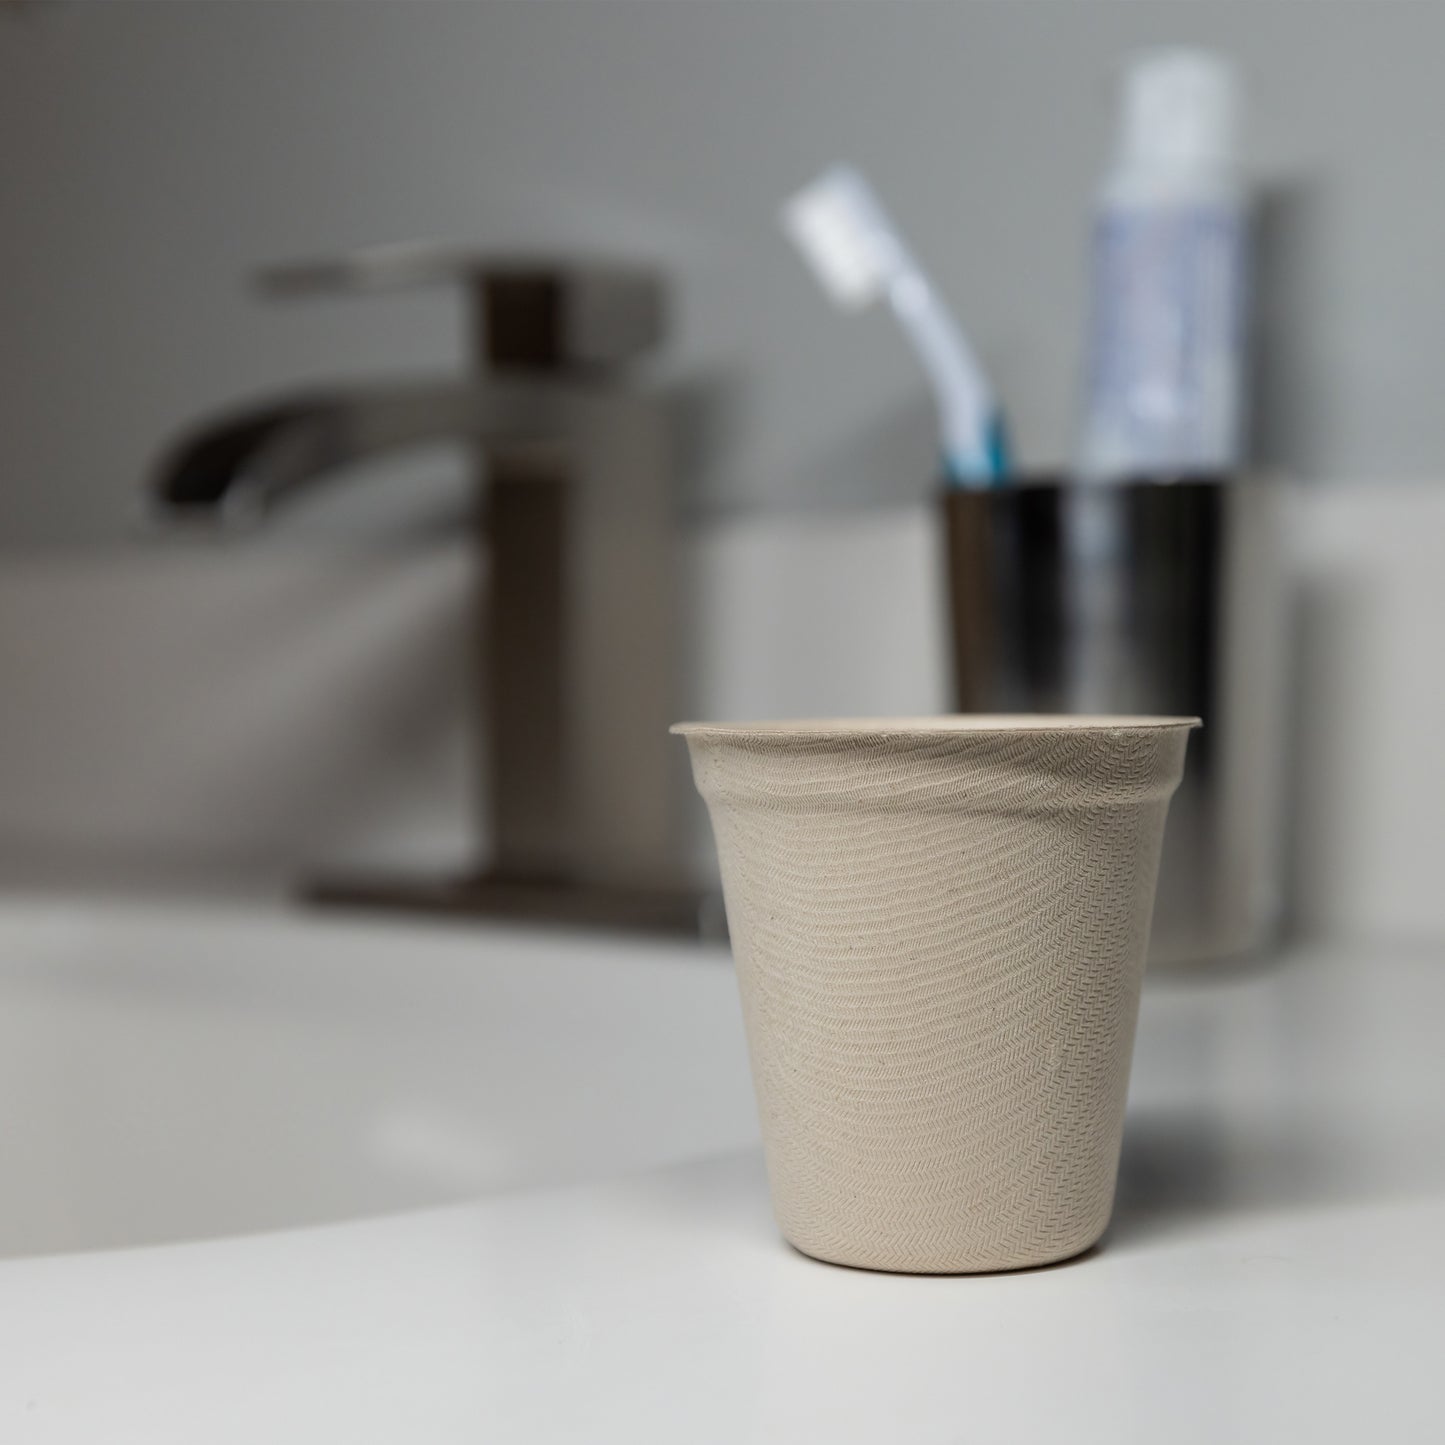 Matter Compostable 3oz Cups - 48 Count